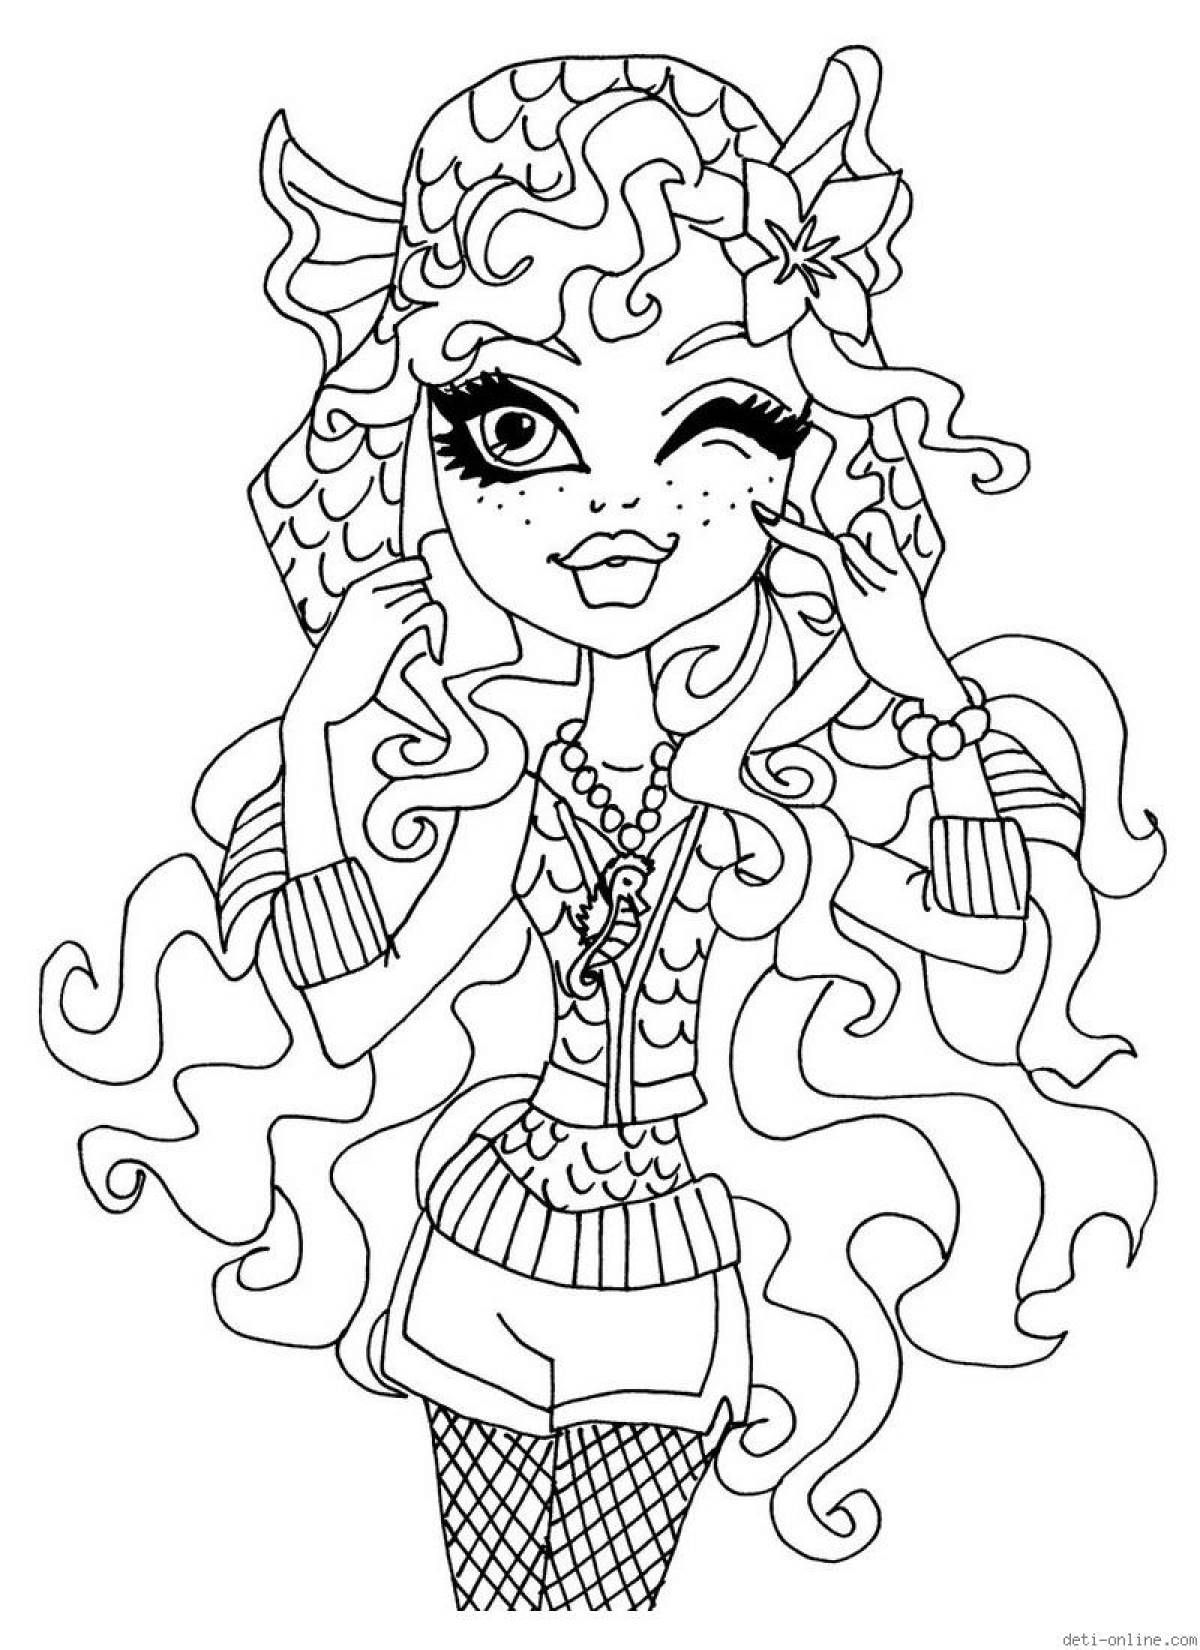 Free download monster high coloring page